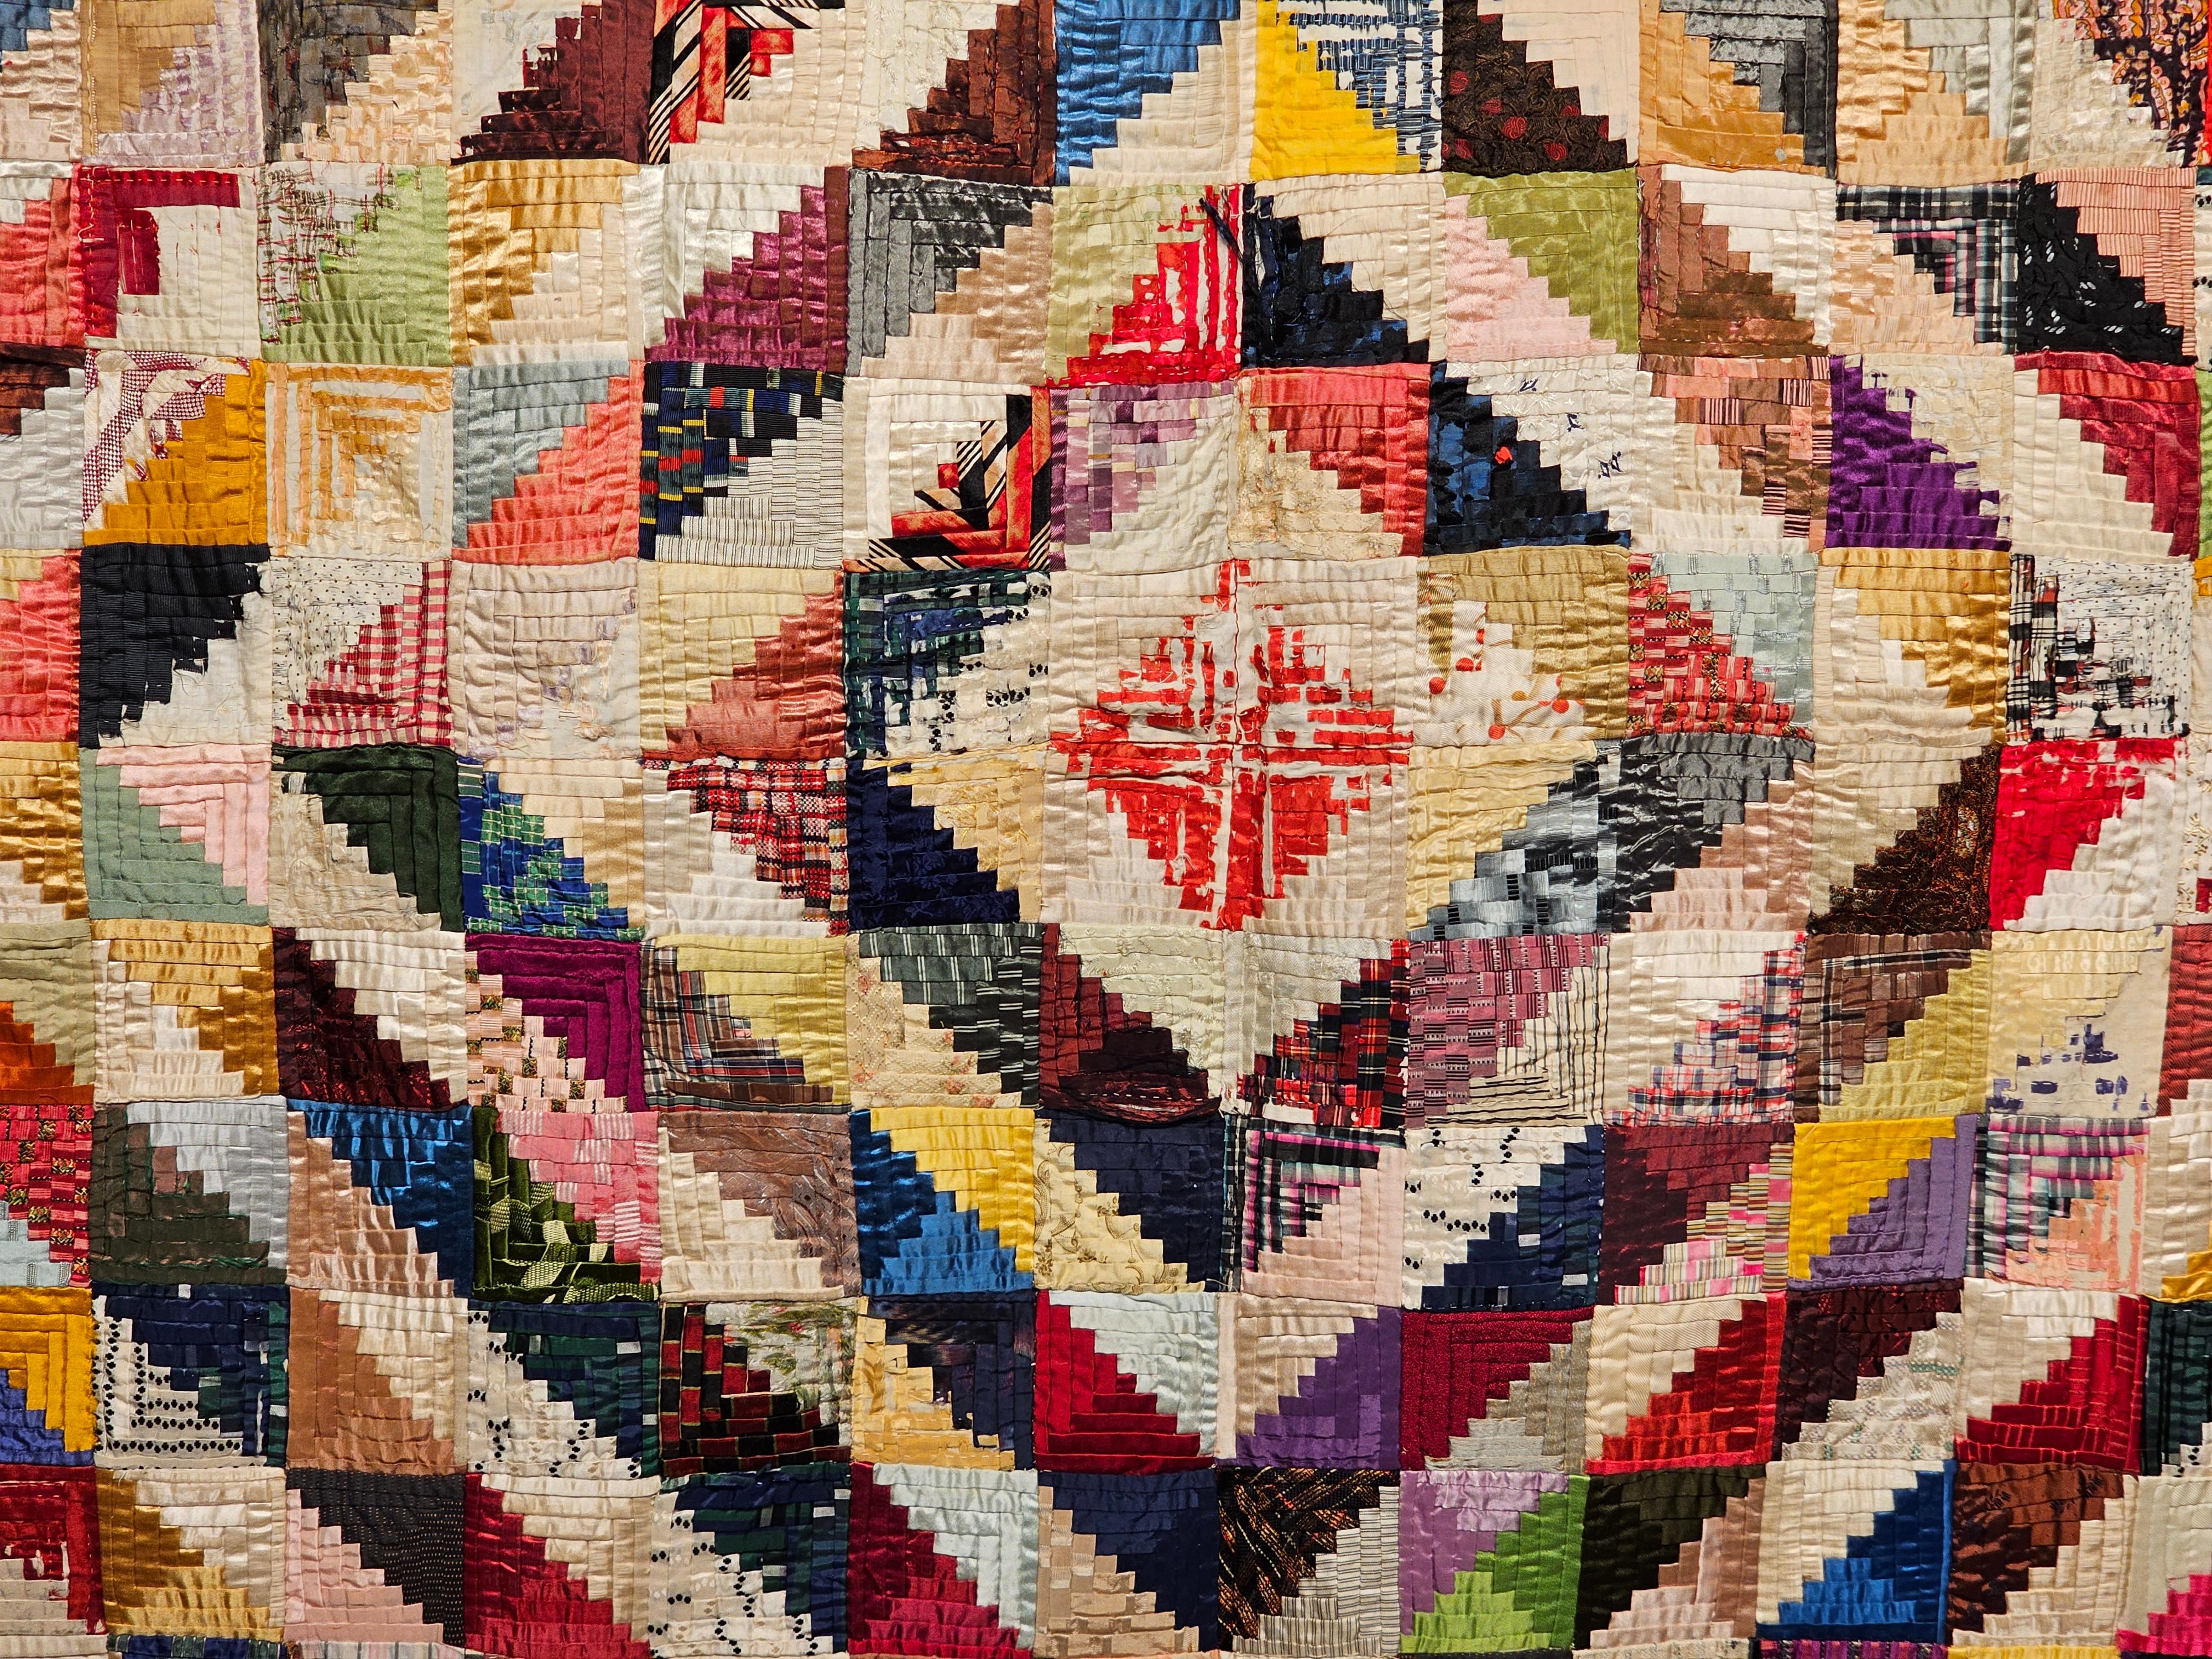 Vegetable Dyed Hand Stitched American Silk Quilt in “Raising Barn” Pattern Circa the Late 1800s For Sale